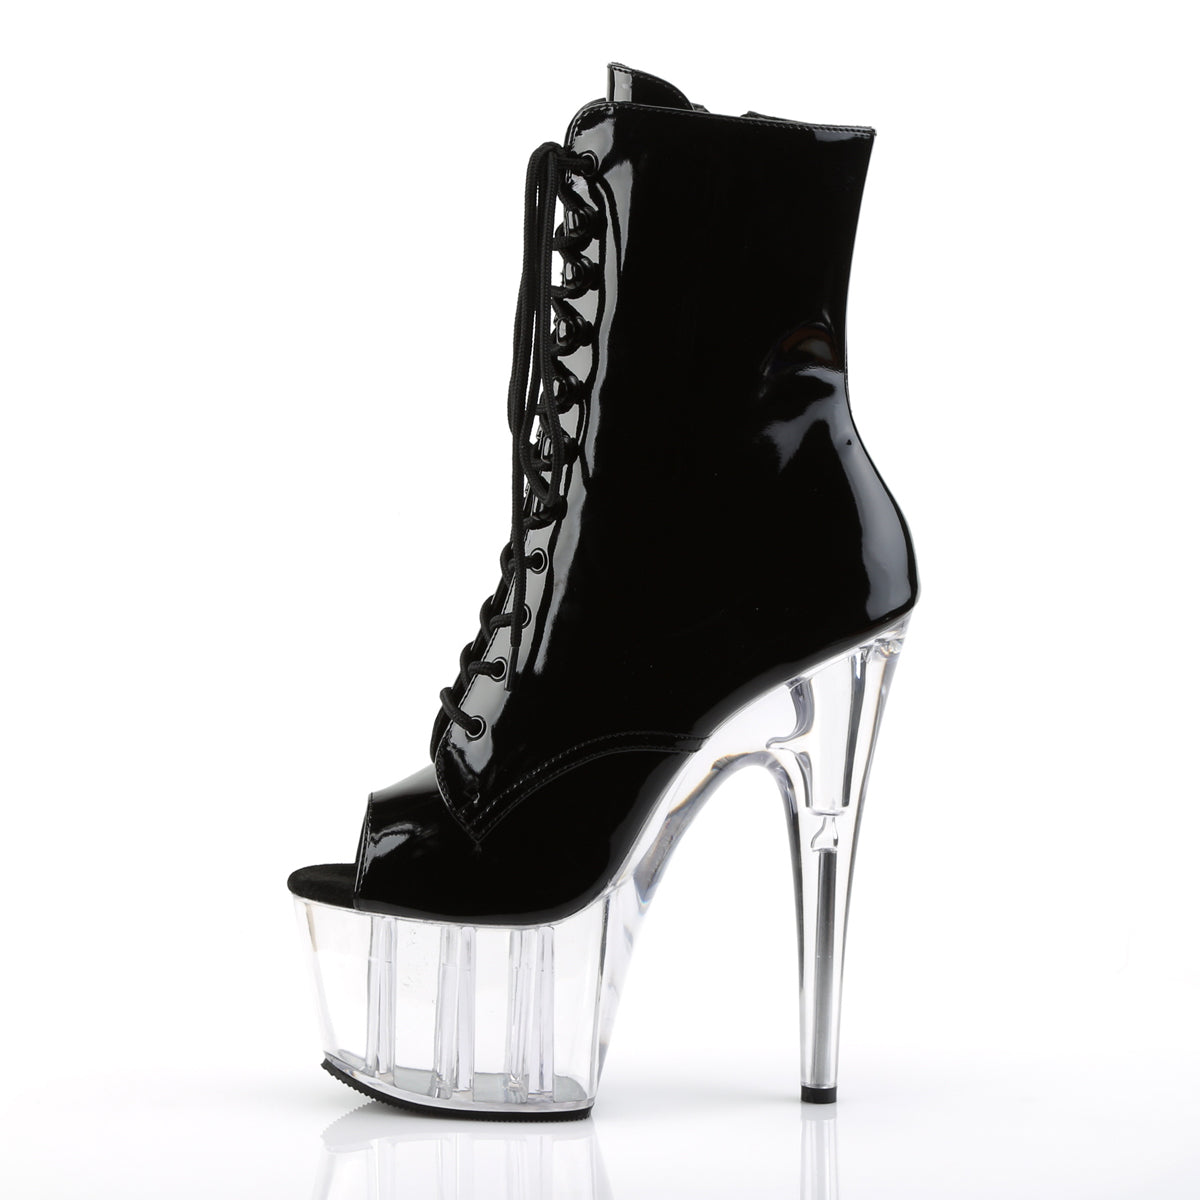 ADORE-1021 Black & Clear Patent Calf High Peep Toe Boots  Multi view 4